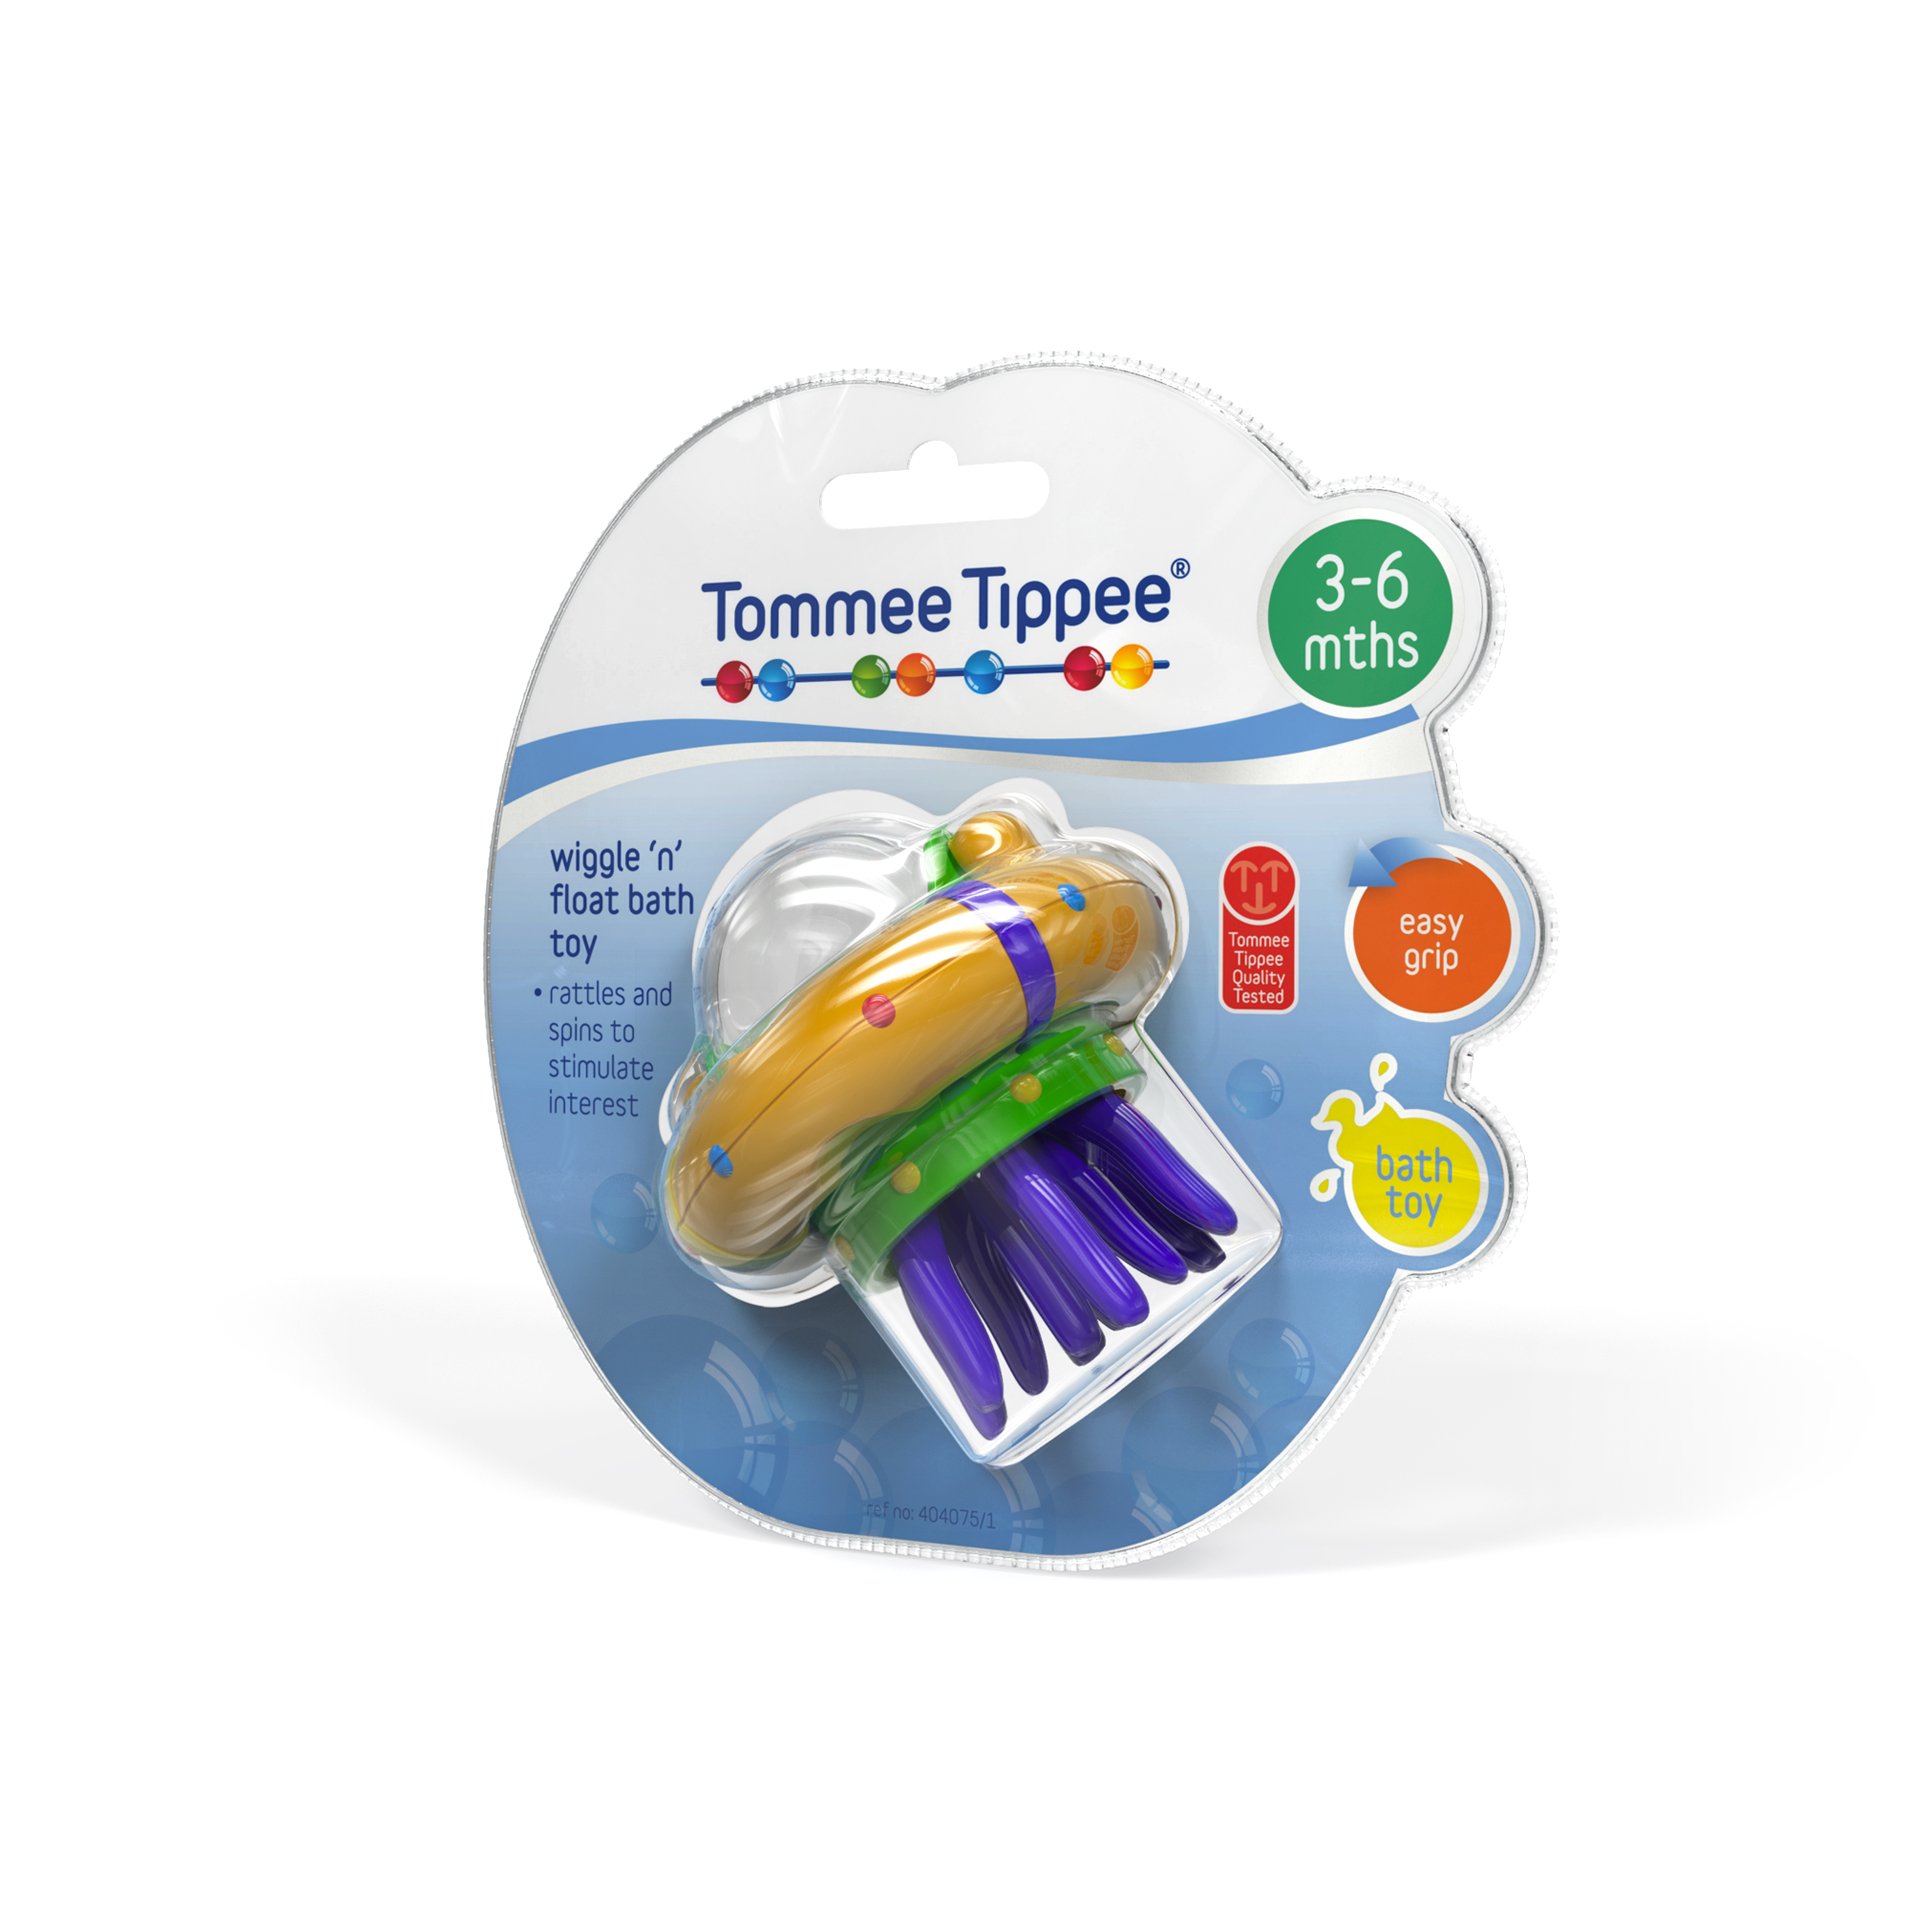 TommeeTippee infant packaging design bath toy